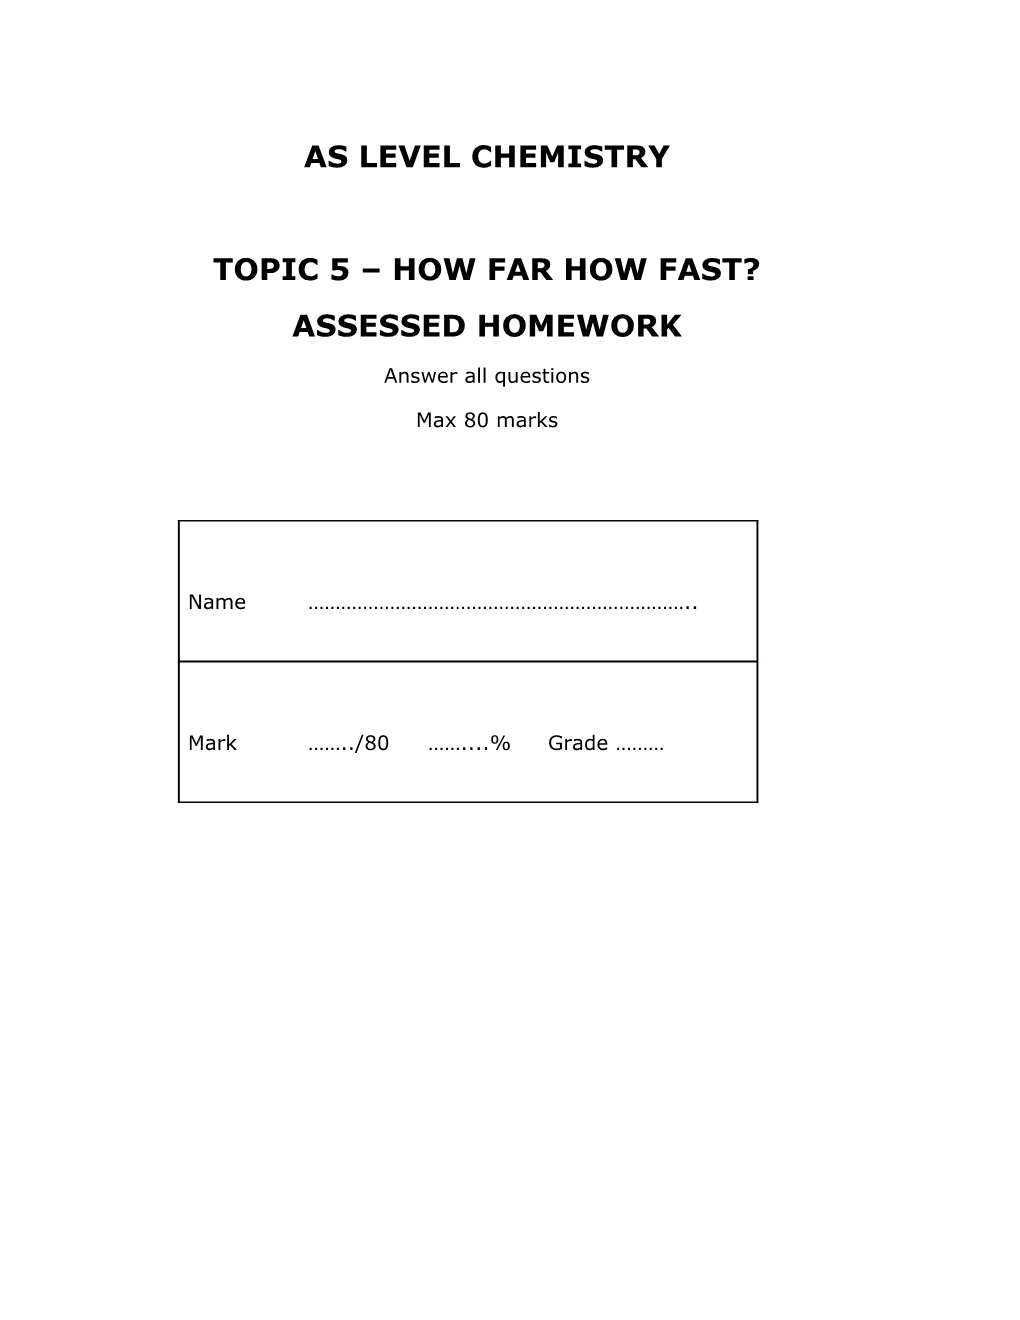 Topic 5 How Far How Fast?